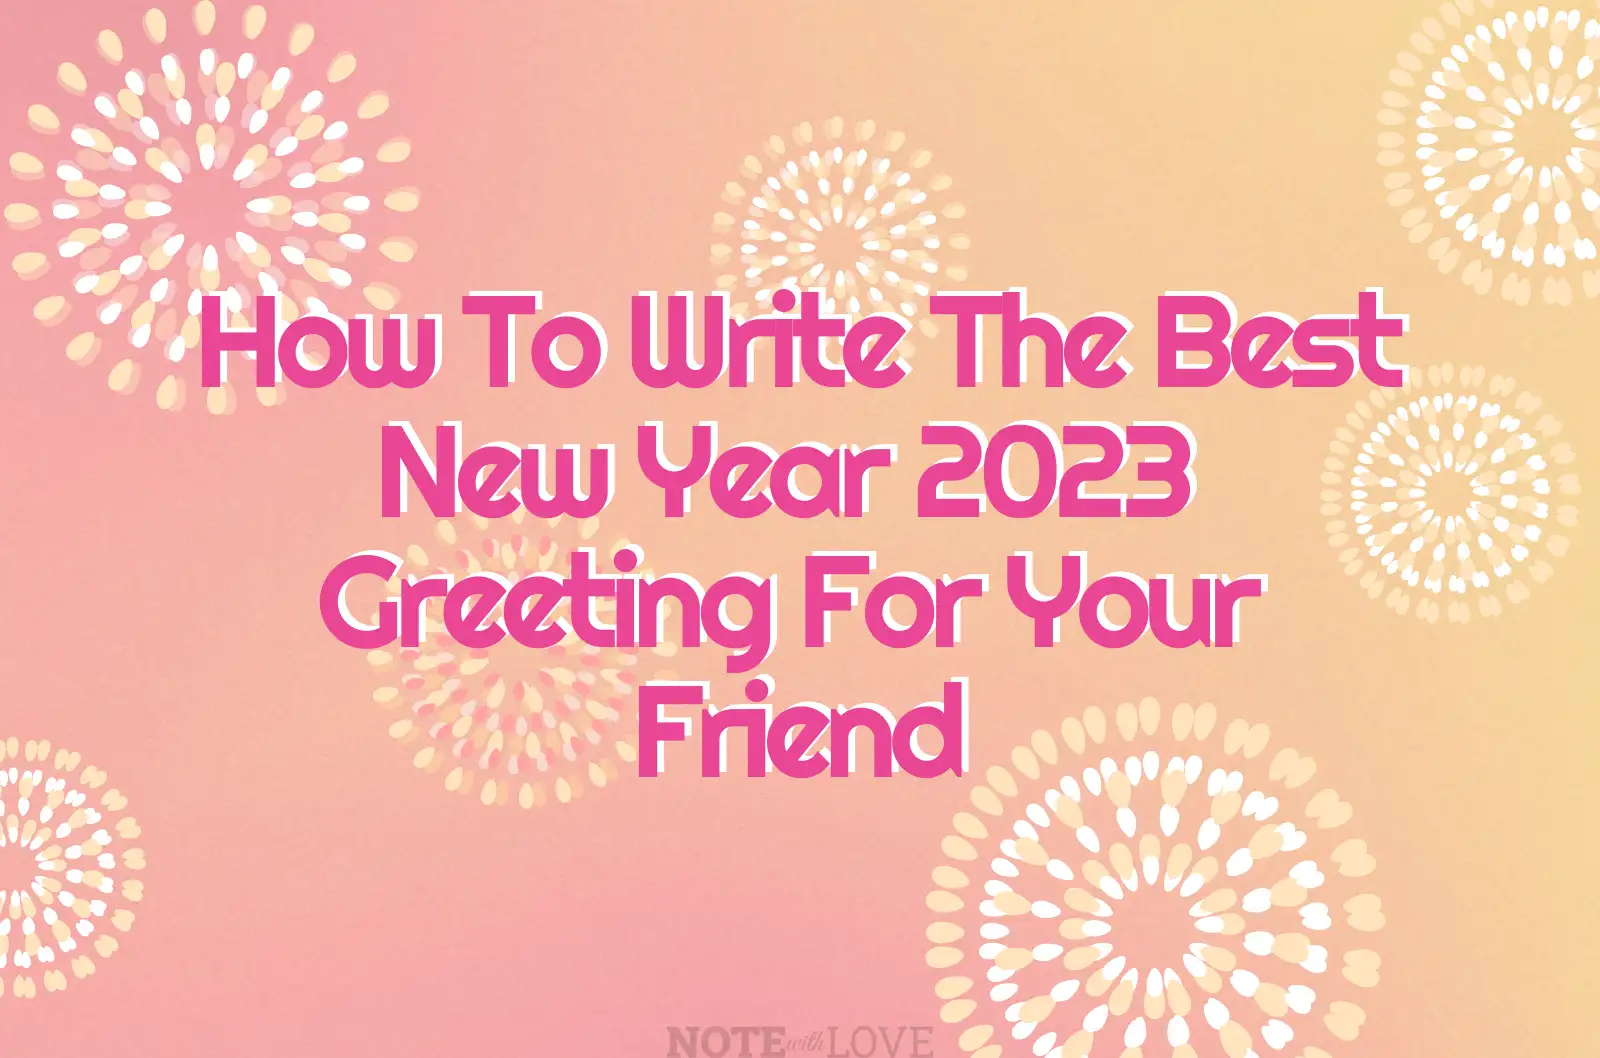 How To Write The Best New Year 2023 Greeting For Your Friend.webp